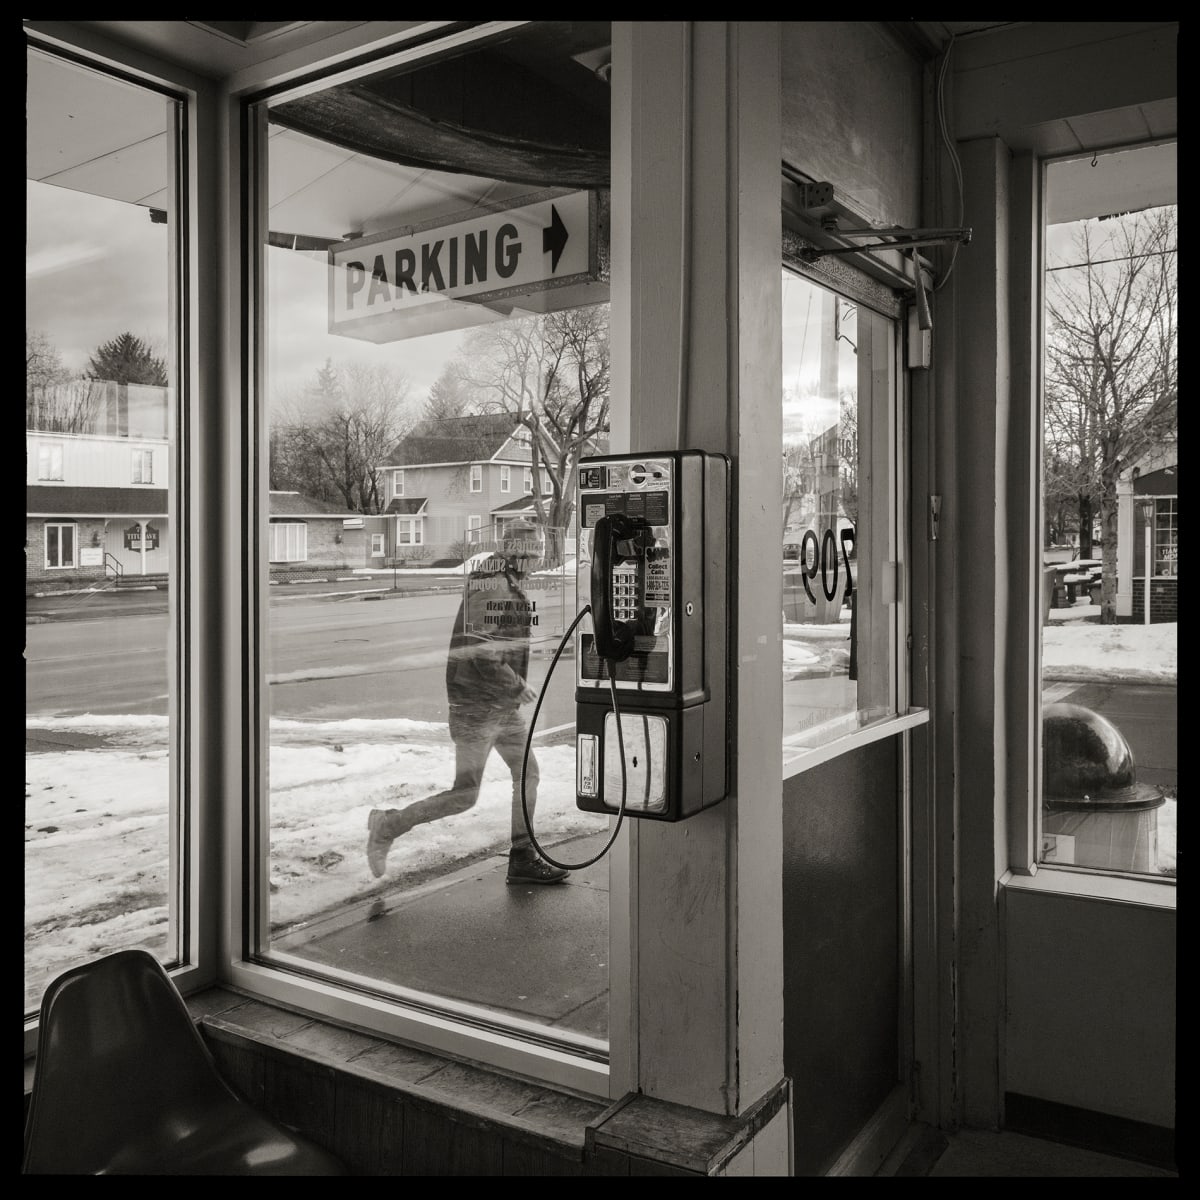 585.266.9536 – RJC Sudsville Laundry, 709 Titus Avenue, Rochester, NY 14617 by Eric T. Kunsman  Image: ID: A black and white image shows a payphone in the middle of a reflective glass entry way. There is a person visible in the window to the left of the payphone.  To the right is the entrance to the building.